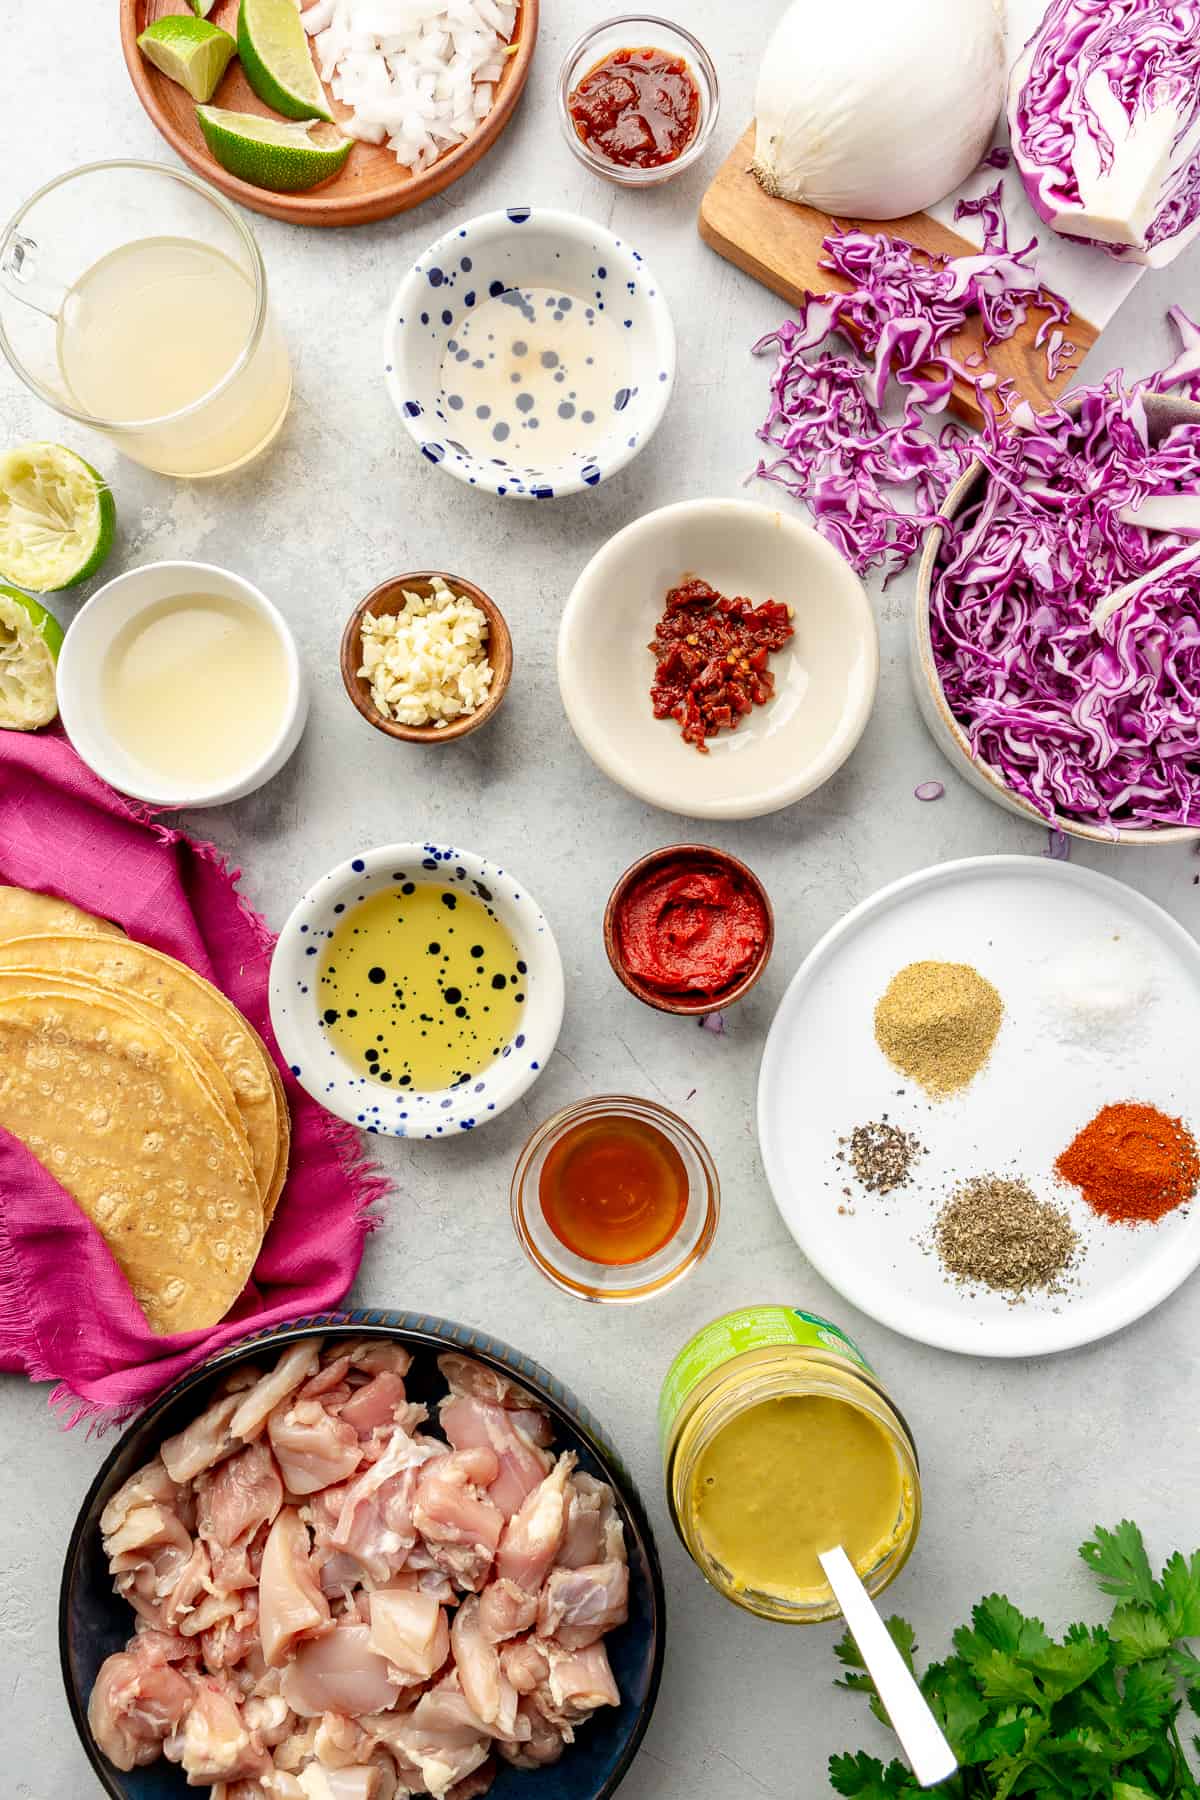 Saucy Chipotle Chicken Tacos ingredients.